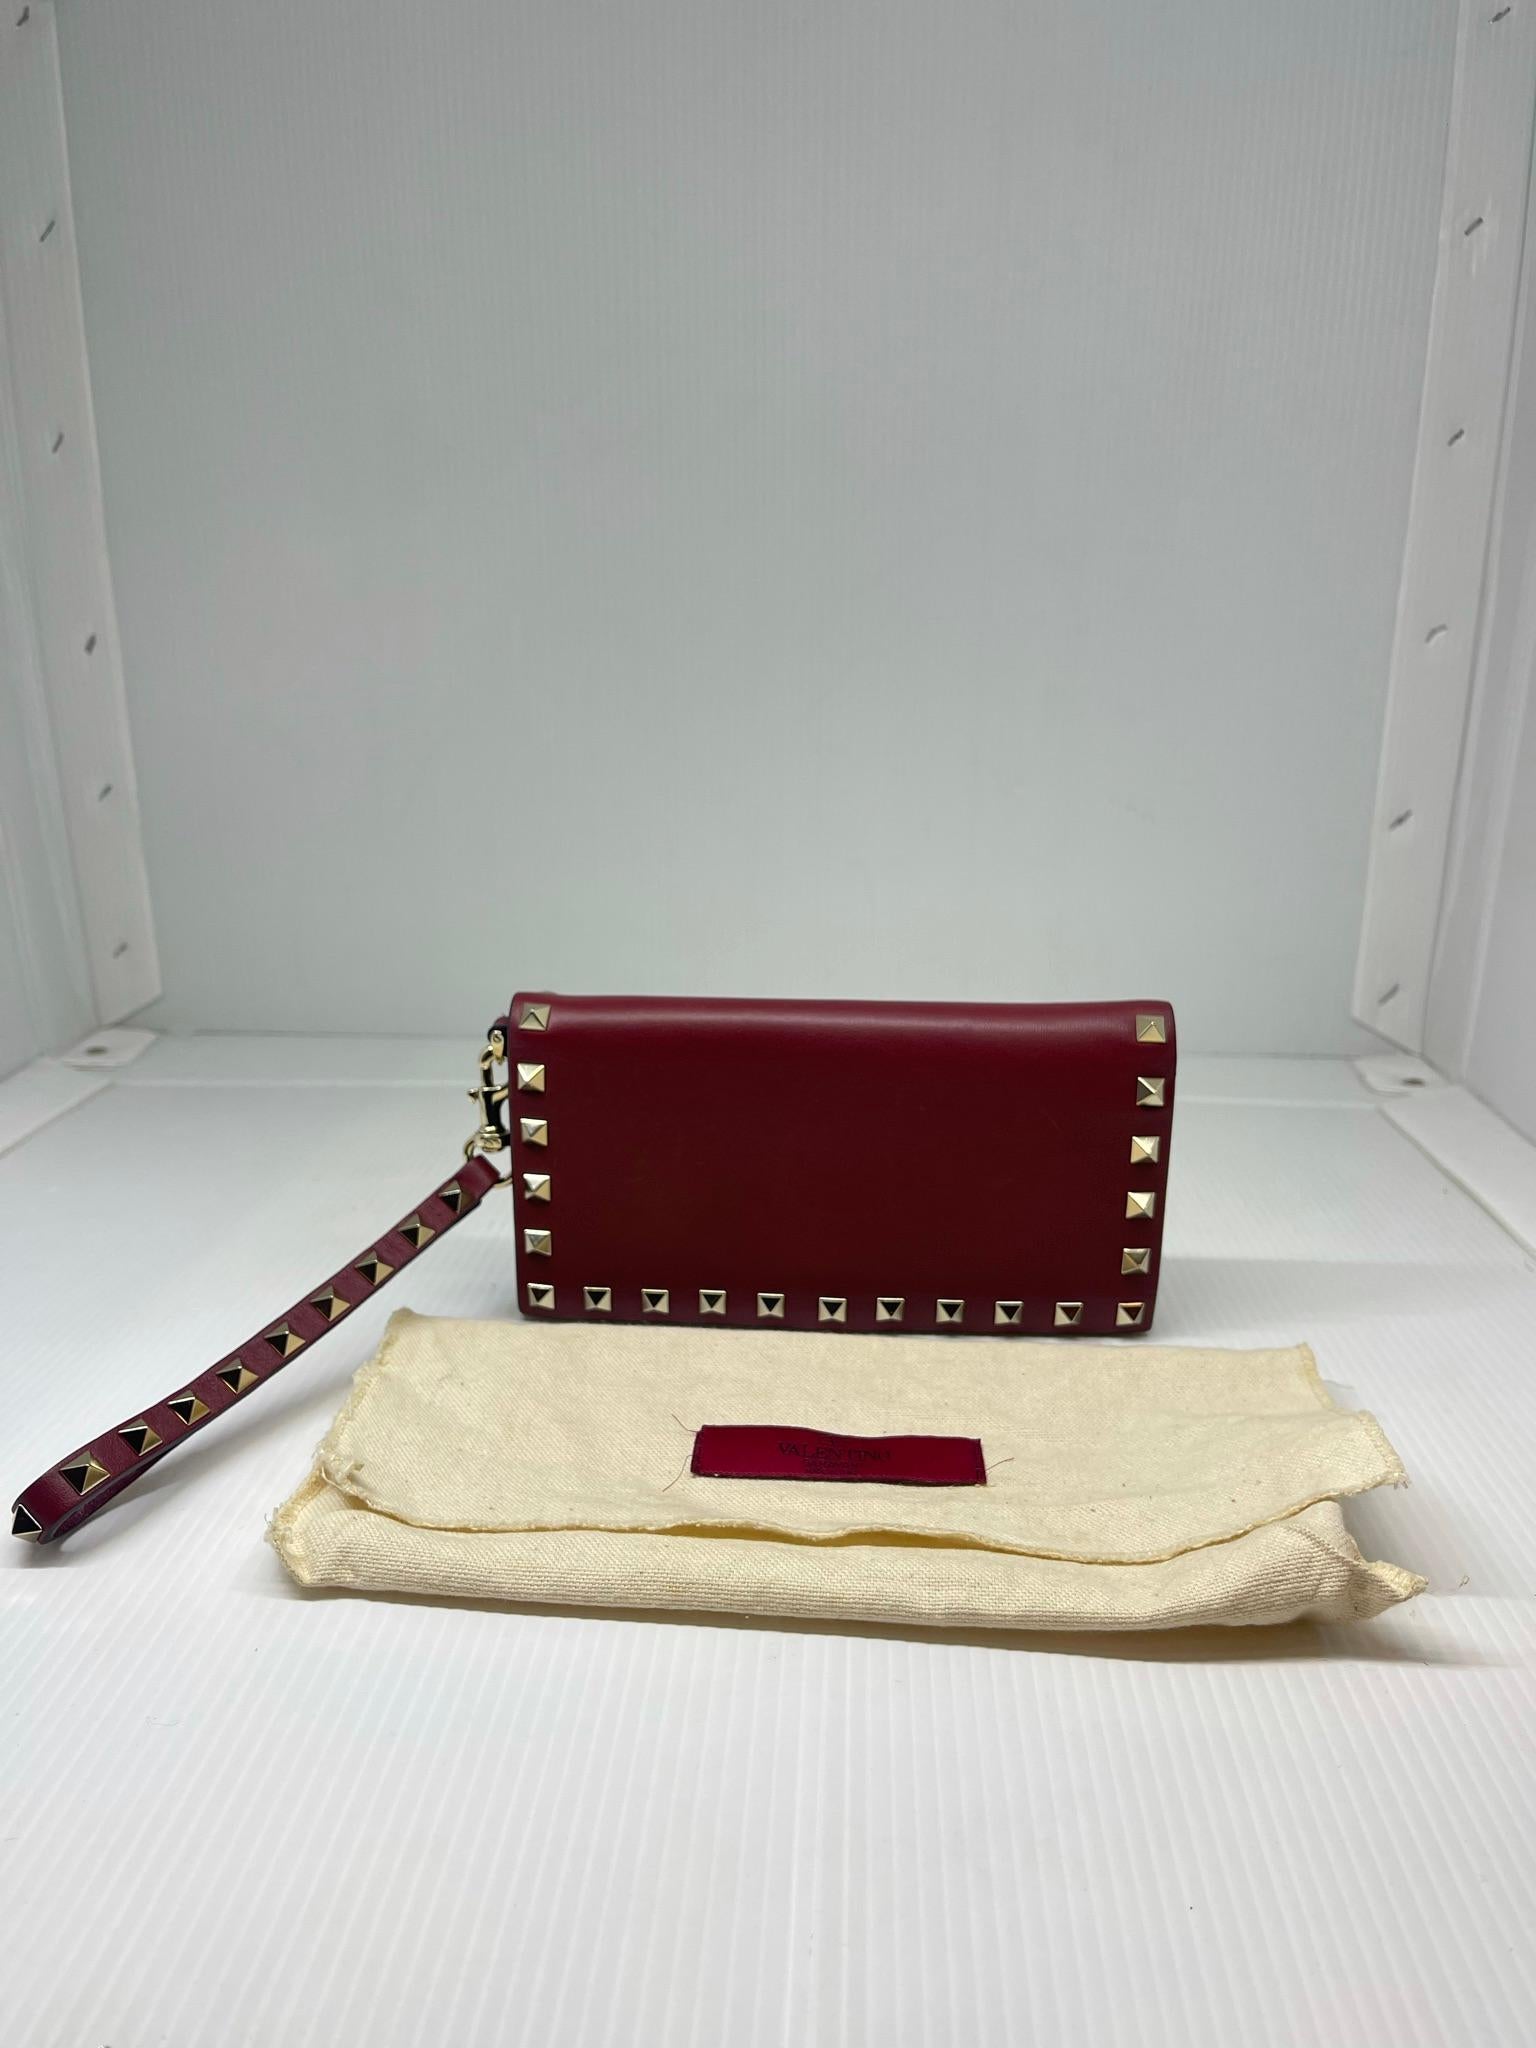 Beautiful valentino rockstud wristlet clutch in red leather. Light gold hardware. Overall in great condition with minor scuffs on the leather surface. Comes with its dust bag and removable strap.